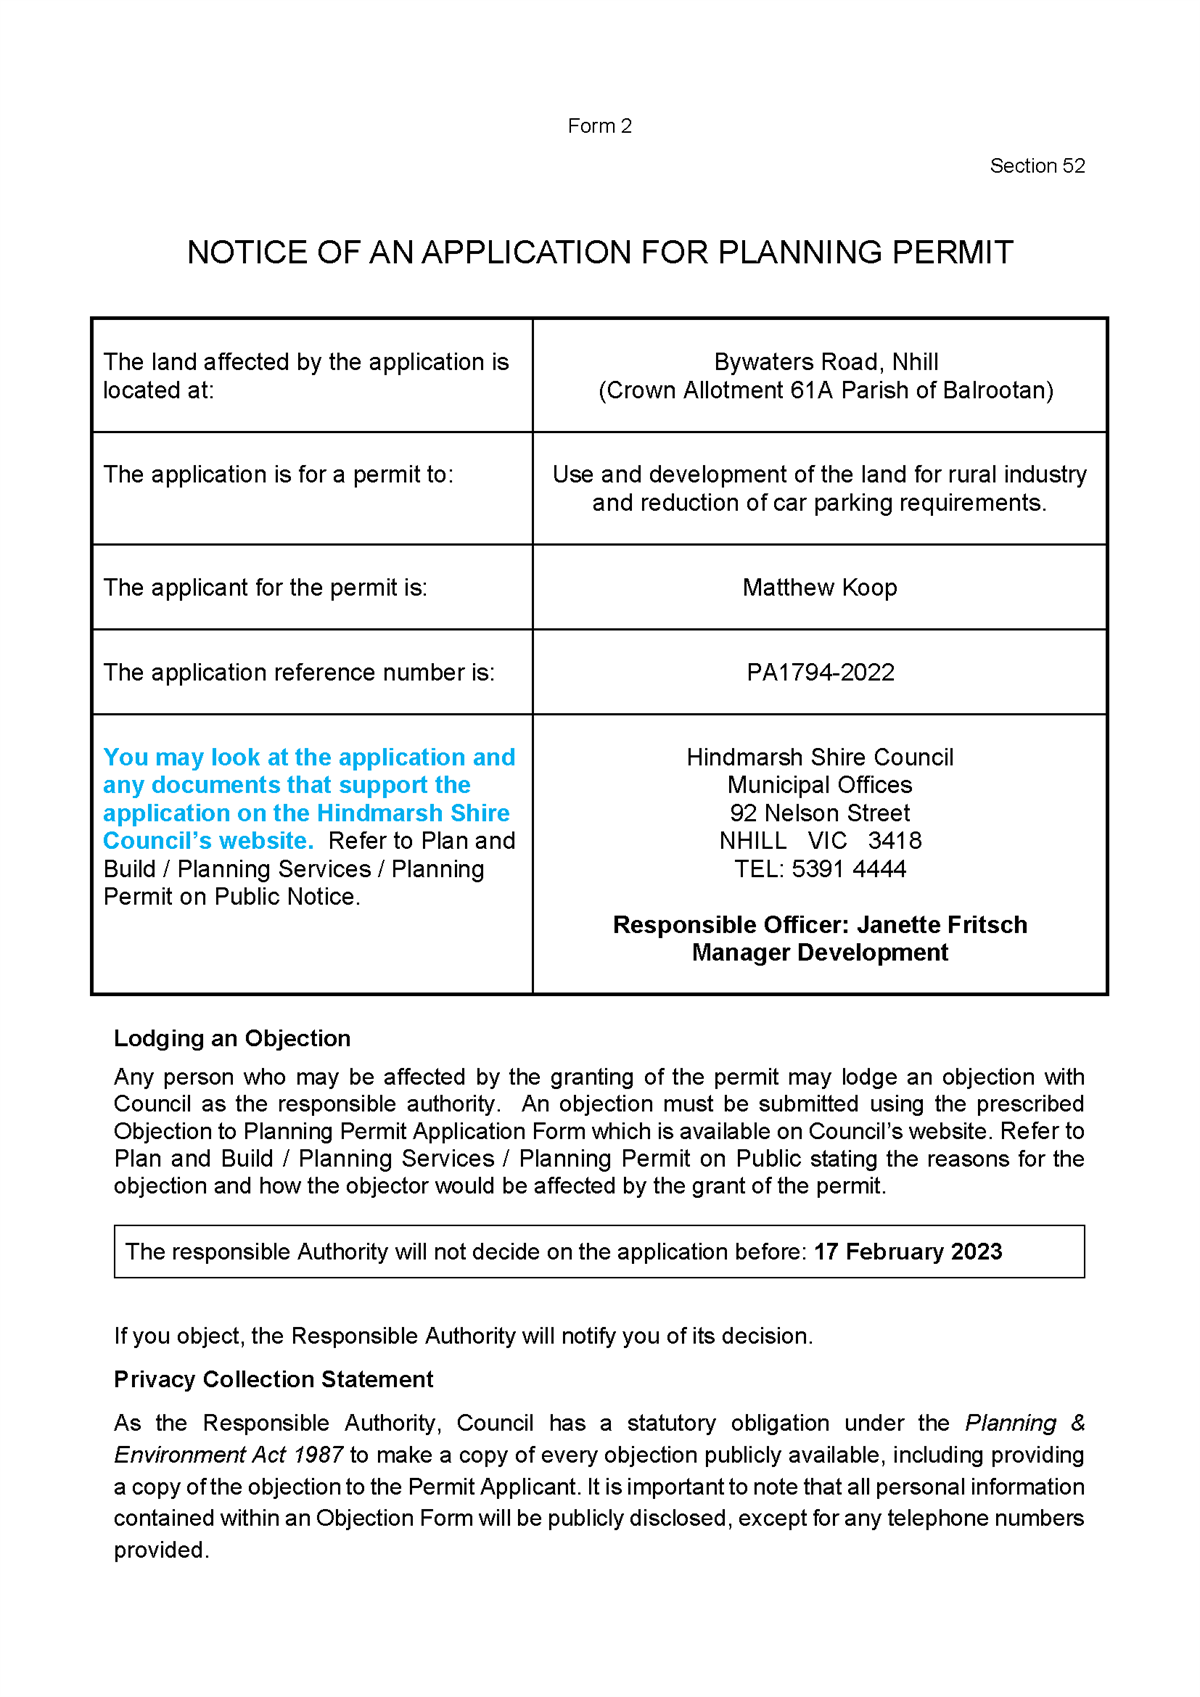 2023_02_01 - PA1794-2022 - ADVERT - Form 2.png